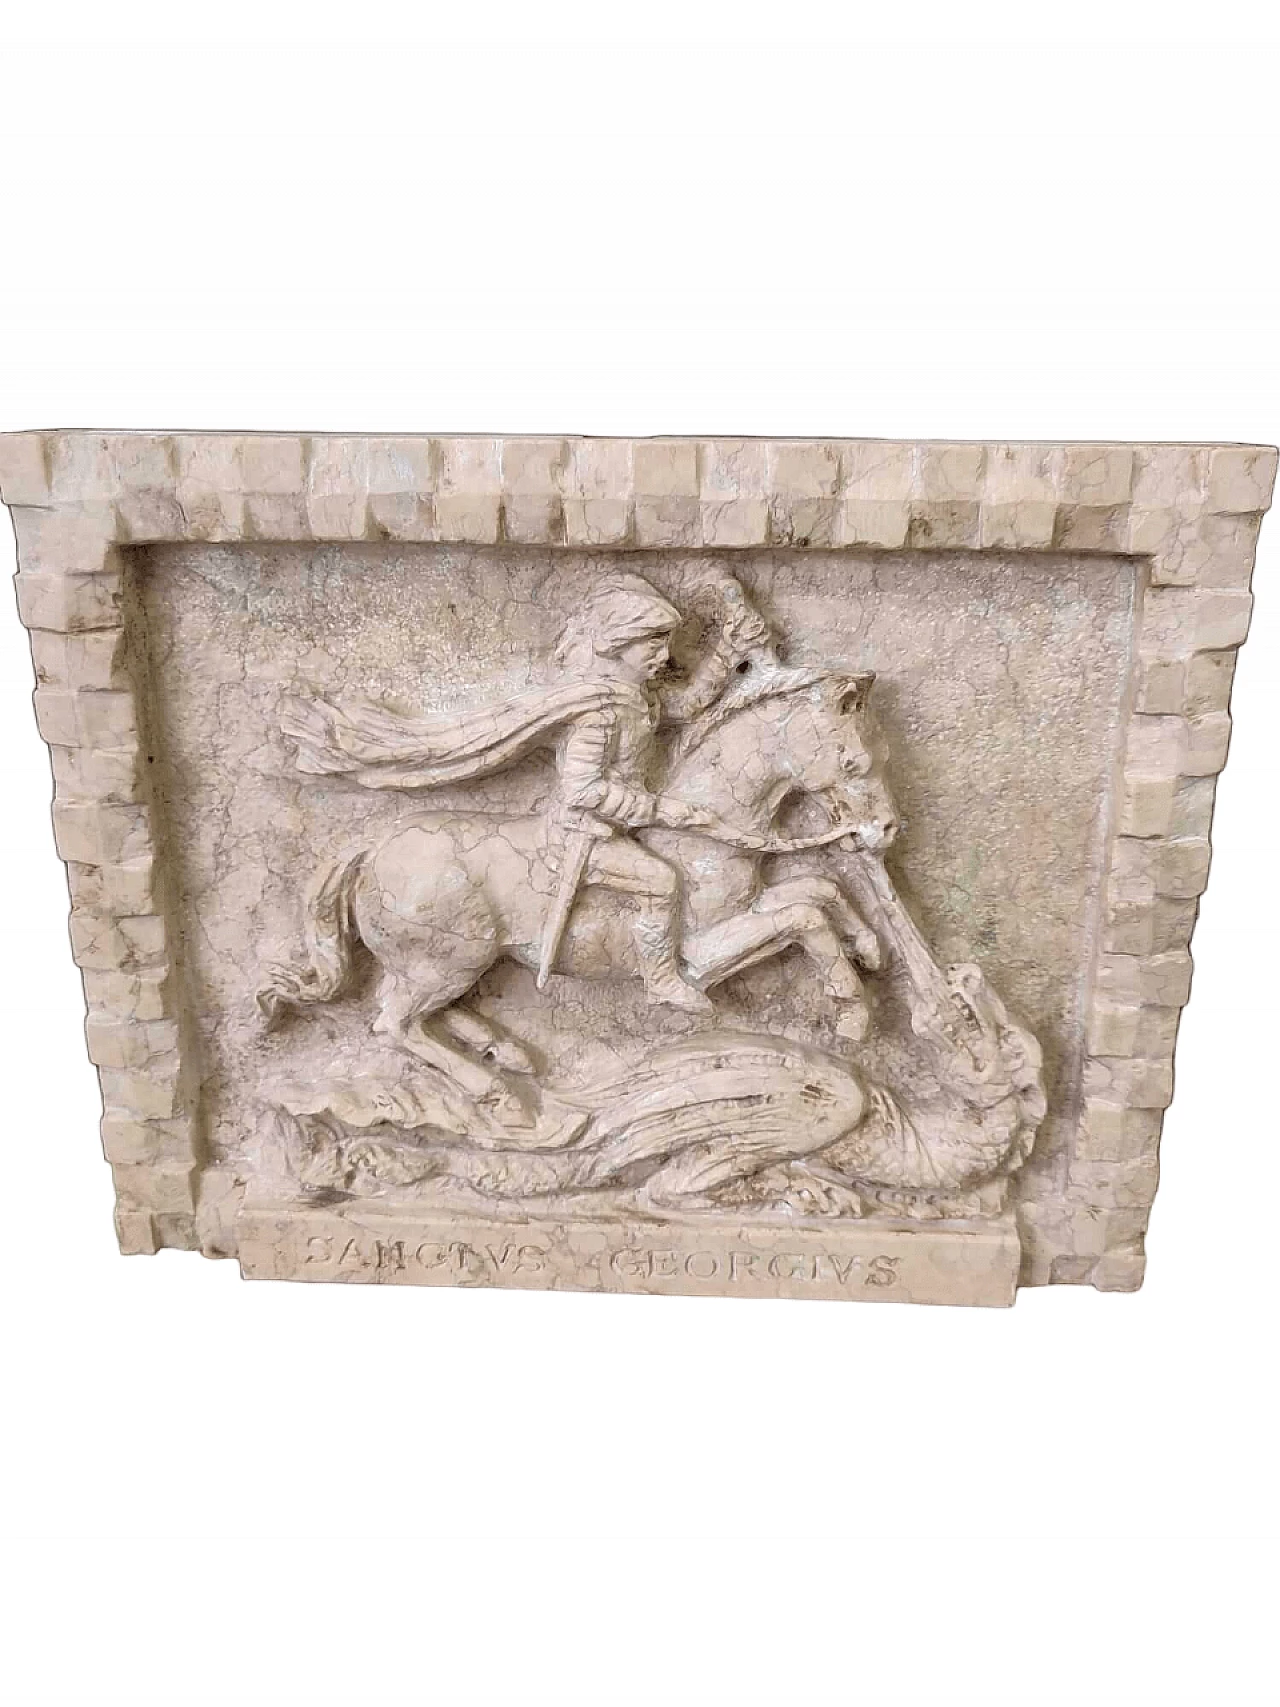 Nembro marble tile with Saint George and the dragon 9